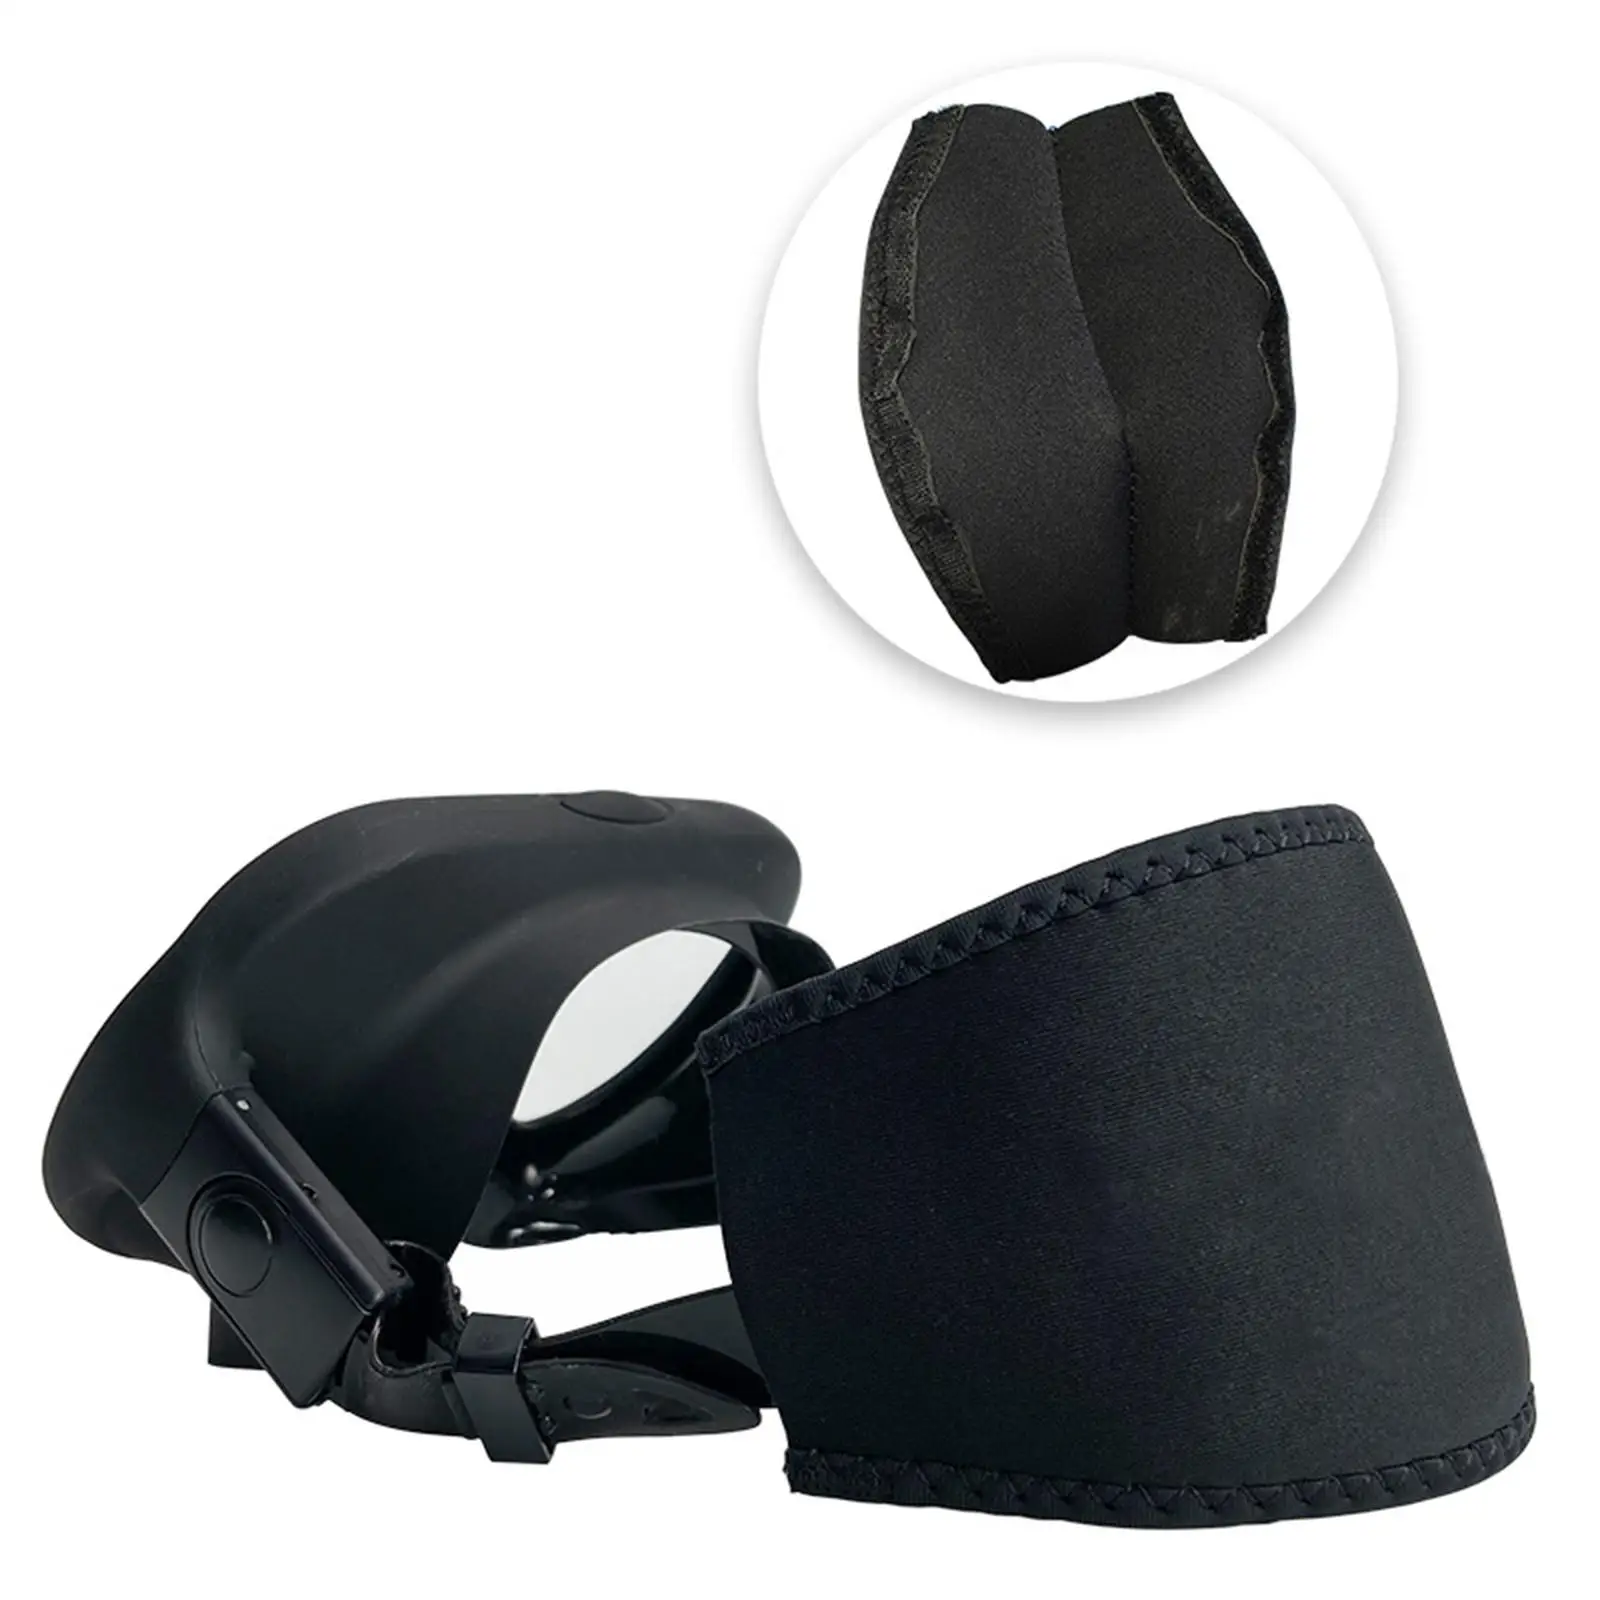 Diving Mask Straps Cover with Sewn Edges Durable Diving Mask Strap Avoid Hair from Being Pulled, Especially for Long Hair